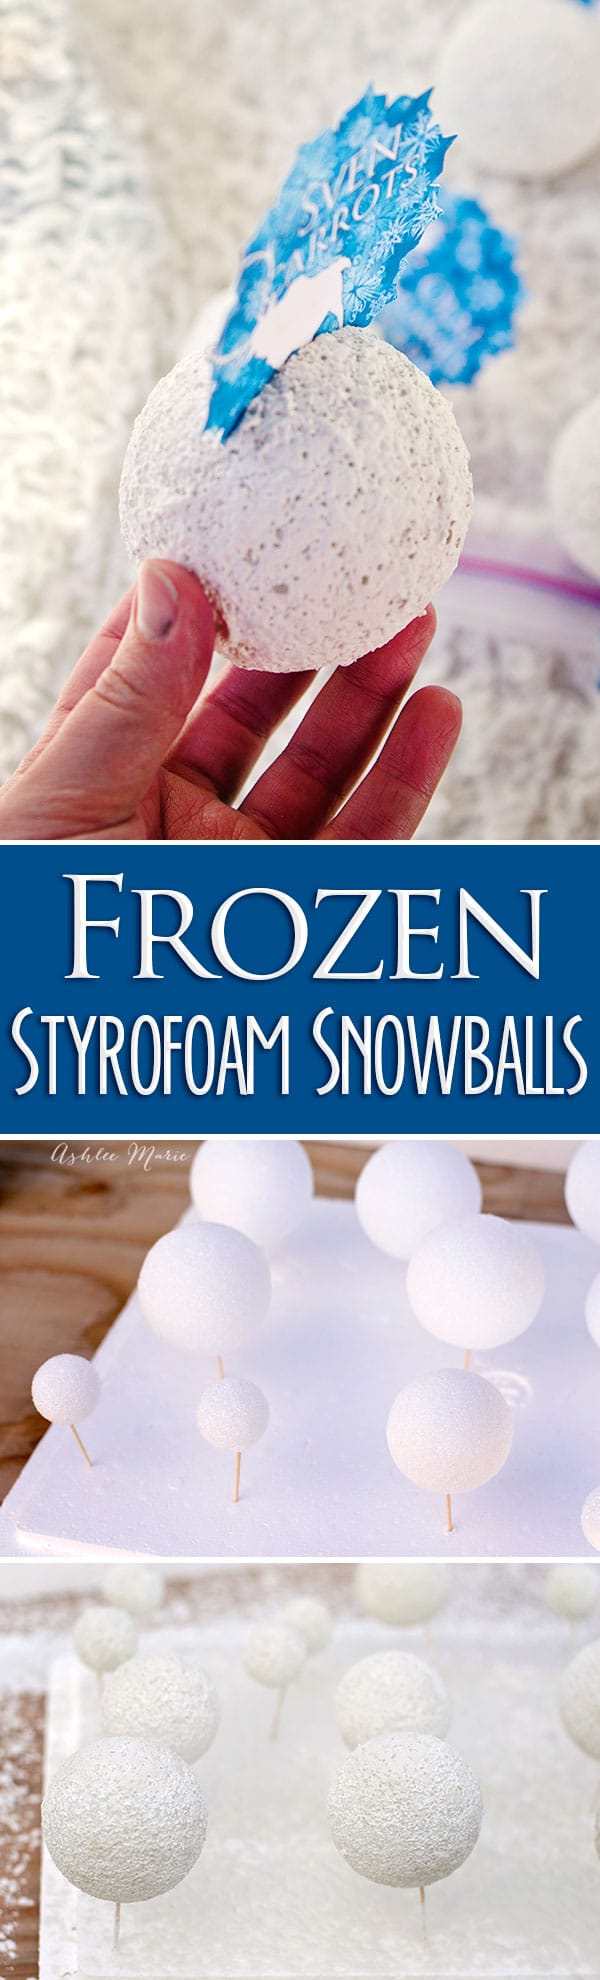 create textured styrofoam snowballs to decorating your winter or frozen party